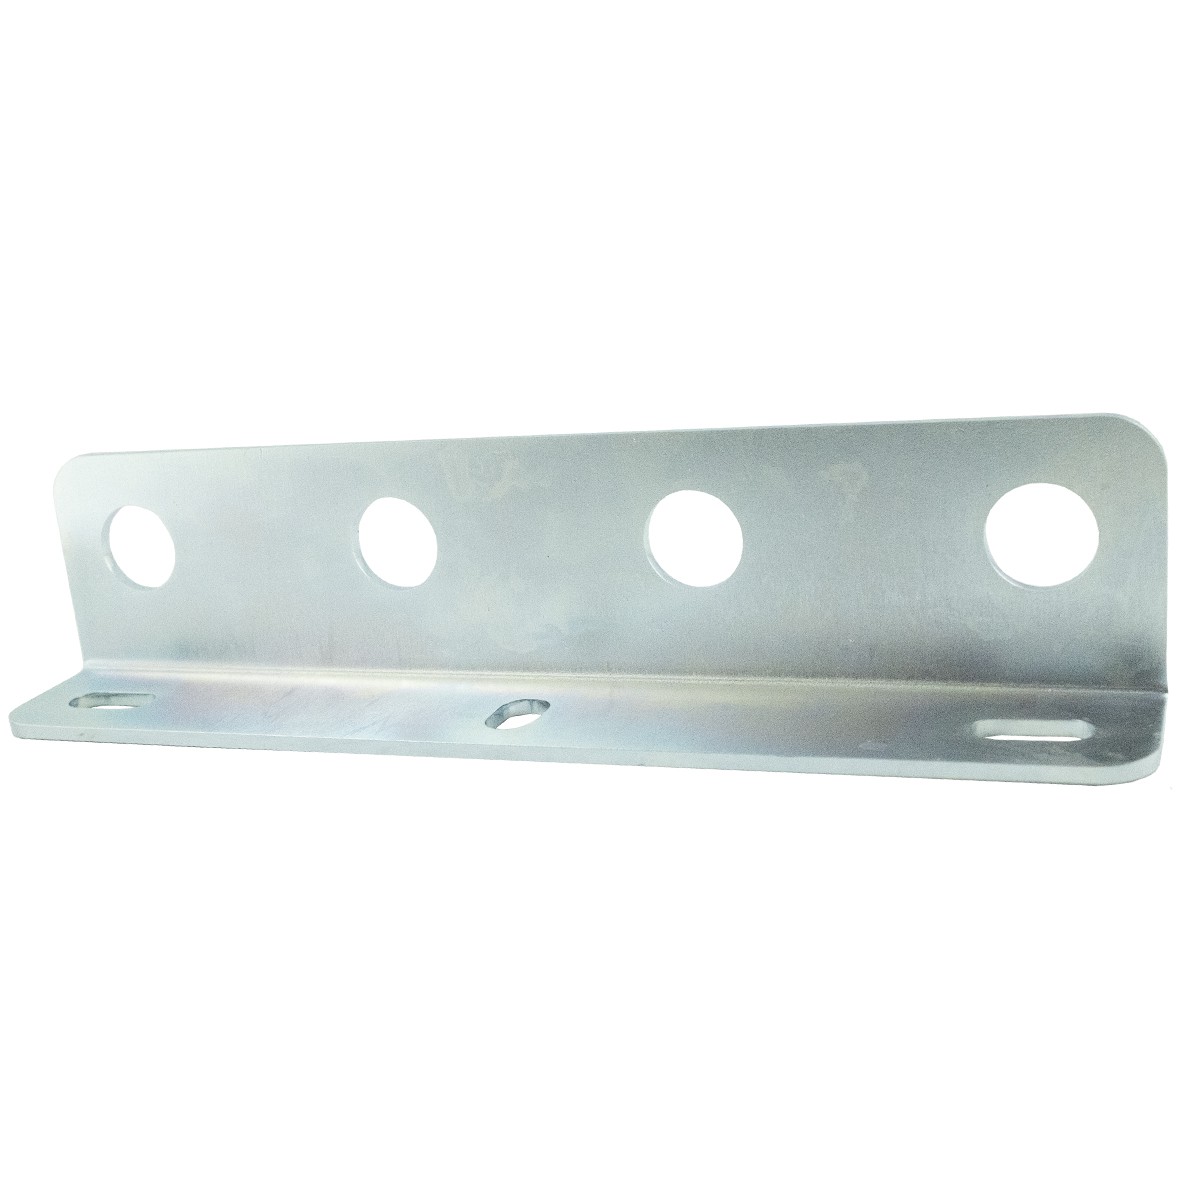 Plate for mounting hydraulic sockets 220 x 50 mm, LOW for 4 sockets - M18 / M16